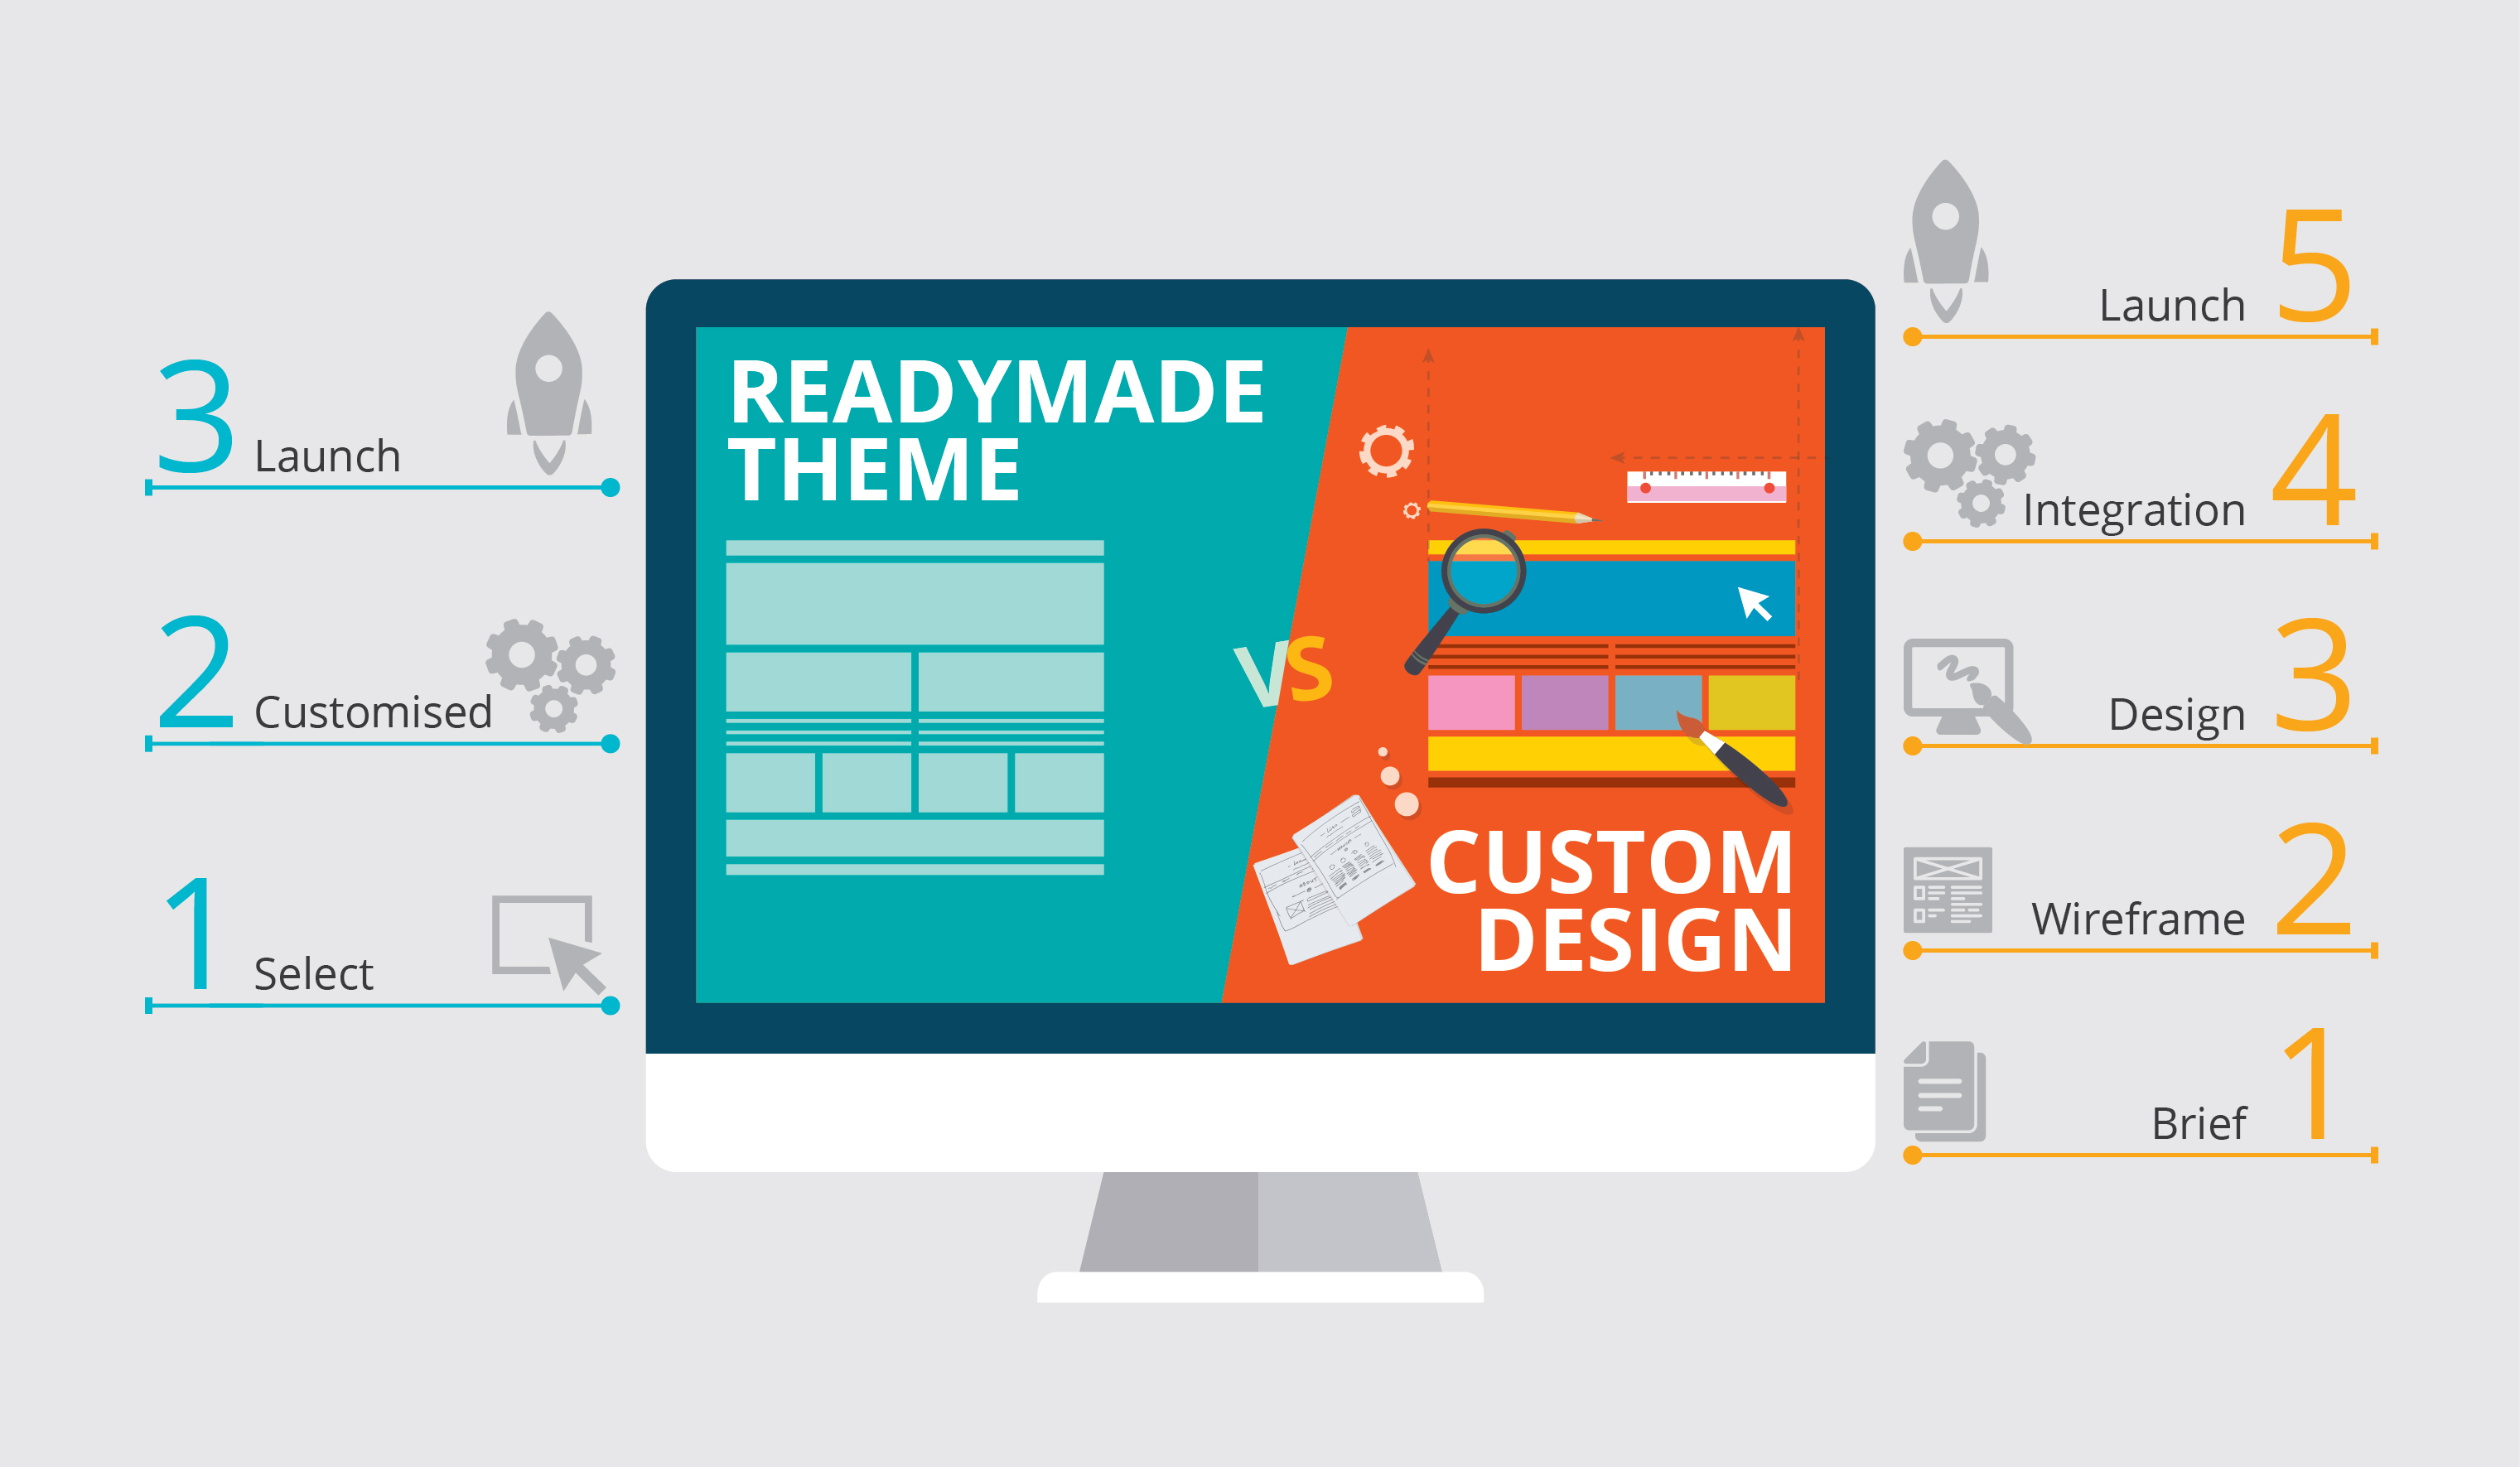 Templates Vs Custom Design - Which is better?